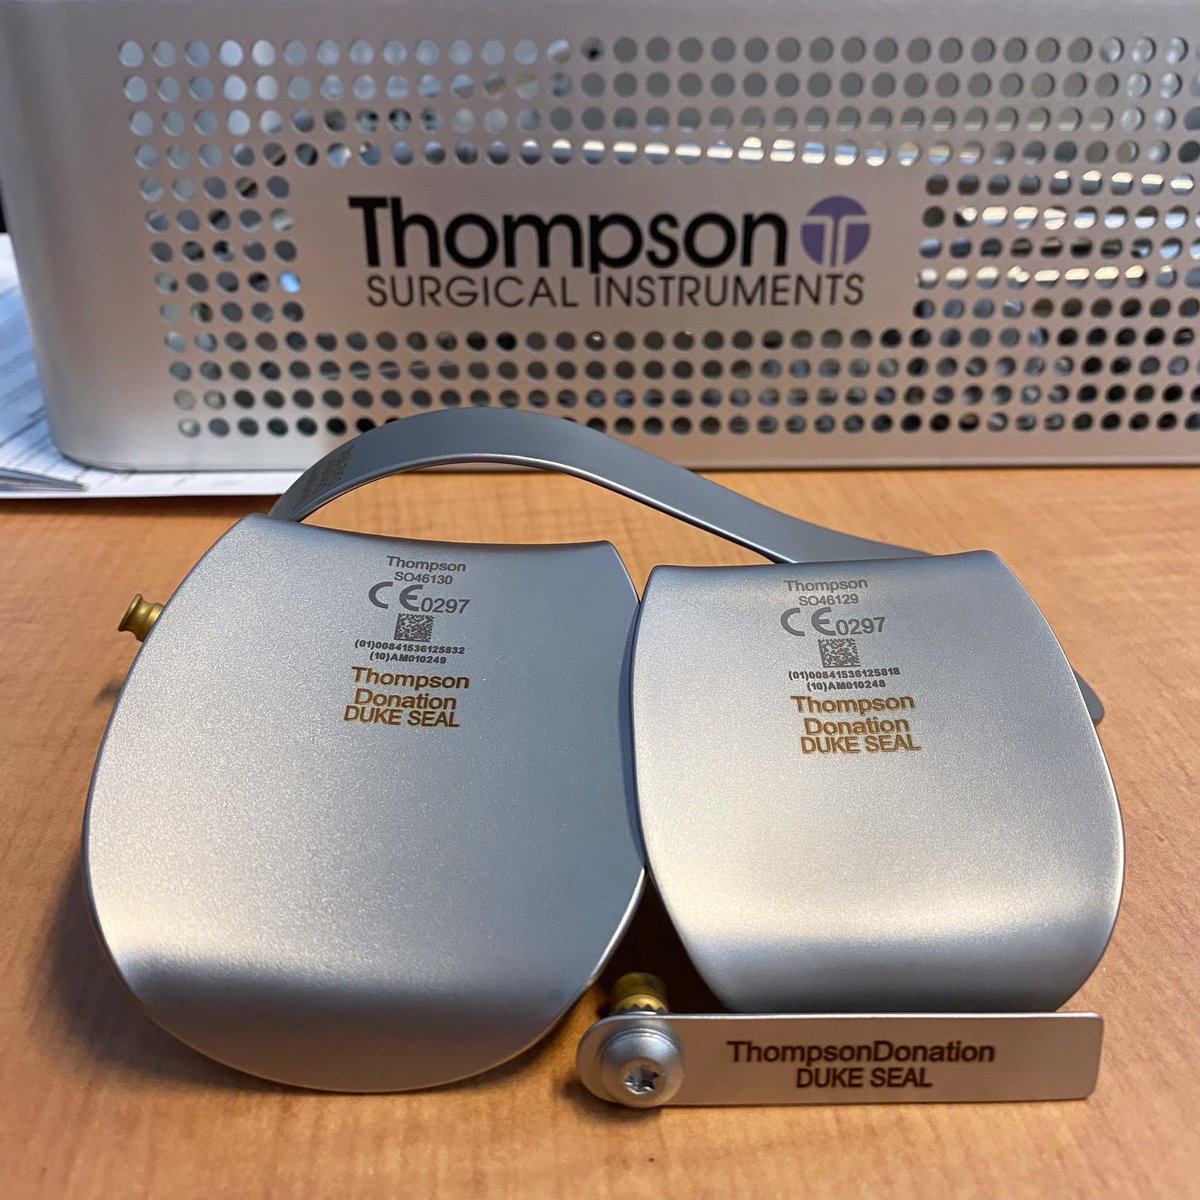 So @ThompsonRetract got it right - the best gifts are the personalized kind. We can’t wait to use this beautiful retractor to teach our residents & med students how to set it up before they see it in the OR - she only looks complicated! @DukeSurgRes #dukeseal
#thompsonretractor